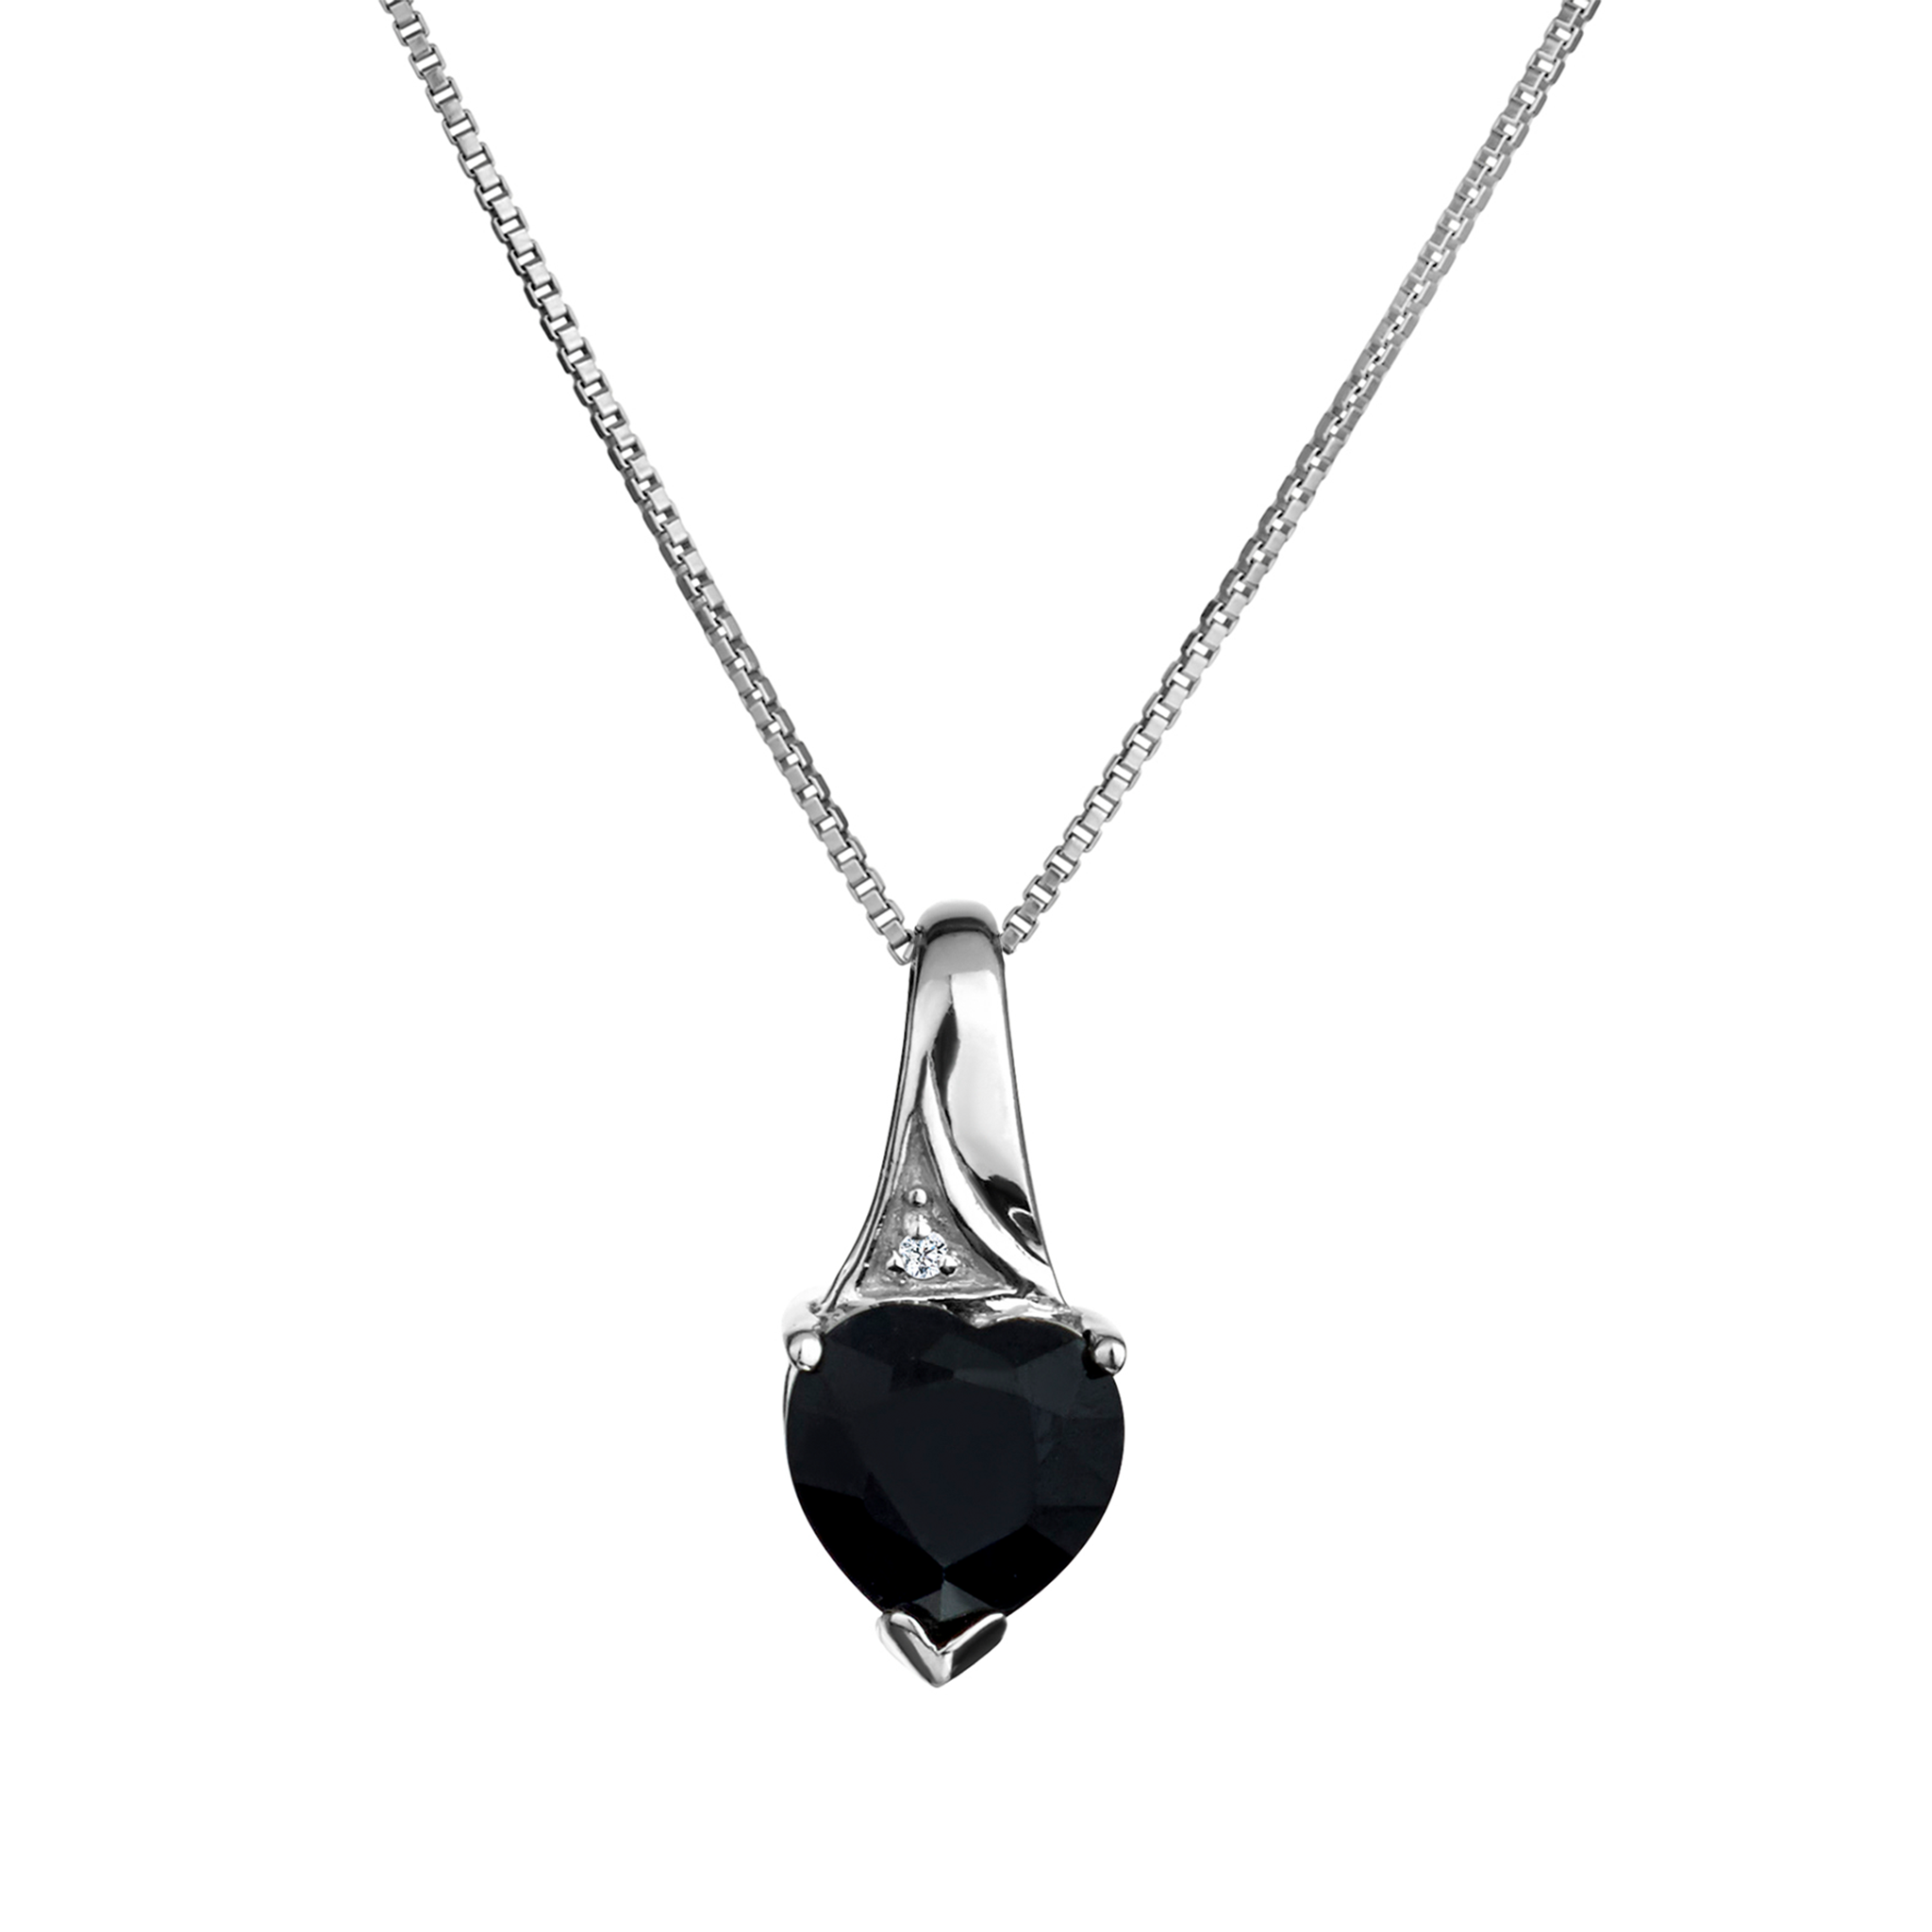 Genuine Black Sapphire Heart Pendant,  Sterling Silver. Necklaces and Pendants. Griffin Jewellery Designs. 